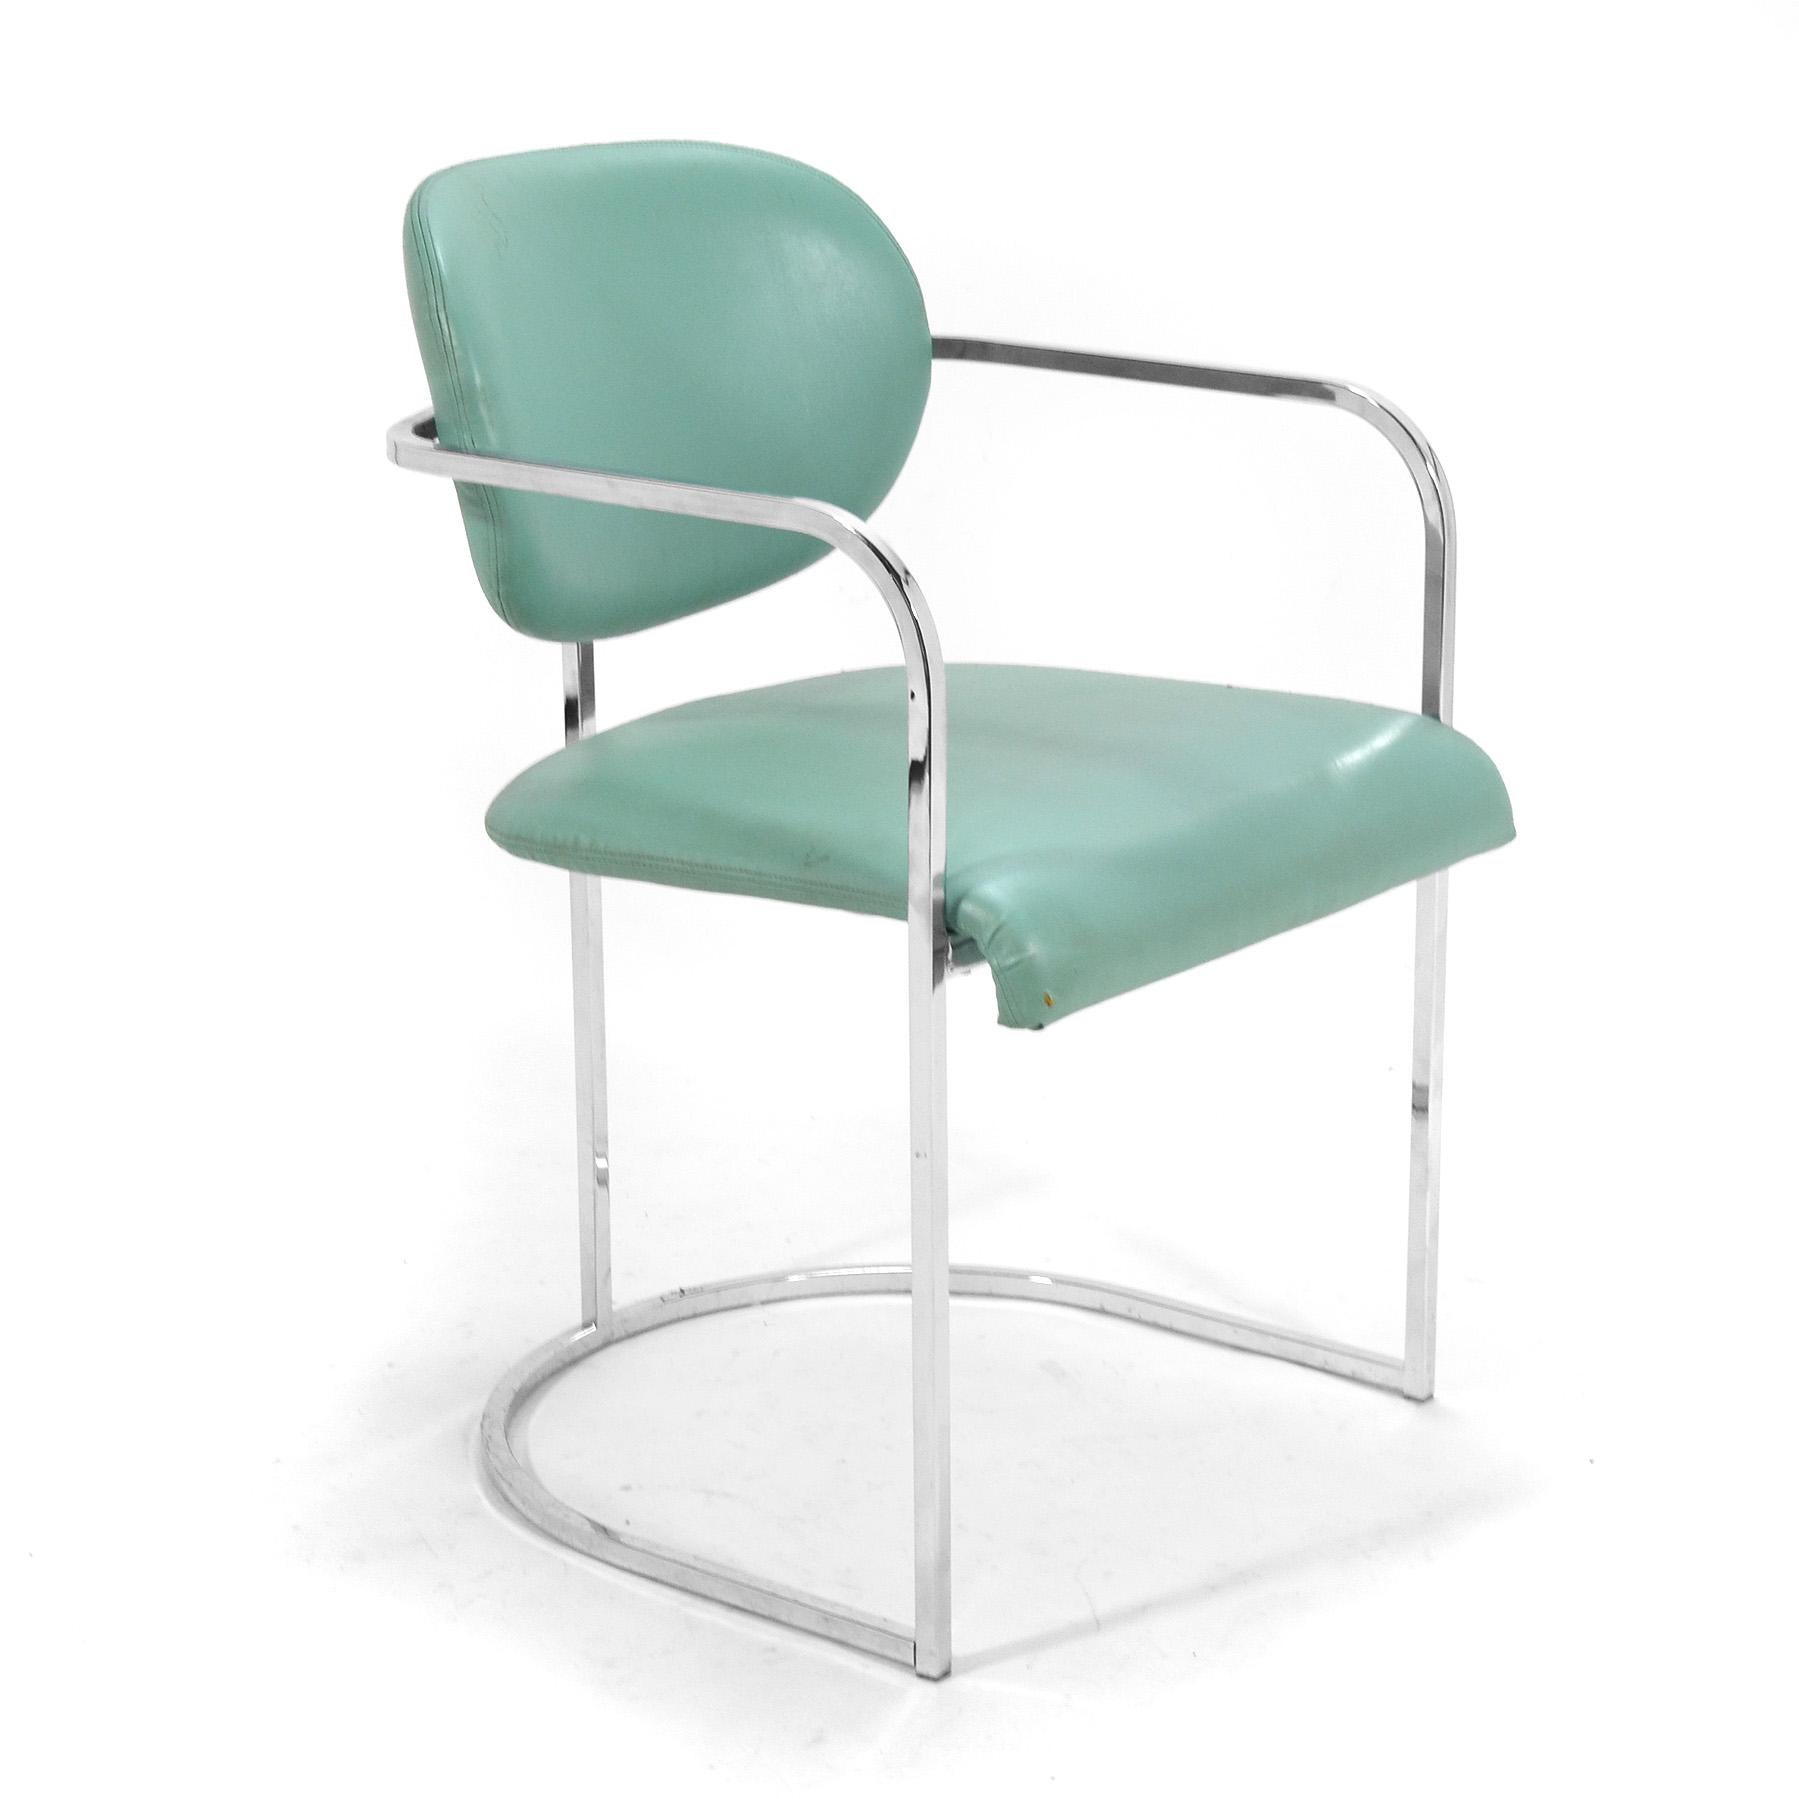 This set of armchairs by the Design Institute America have frames of chrome-plated steel which support upholstered seats and backs, giving them a floating appearance.
They currently retain their original turquoise upholstery, but are ready for